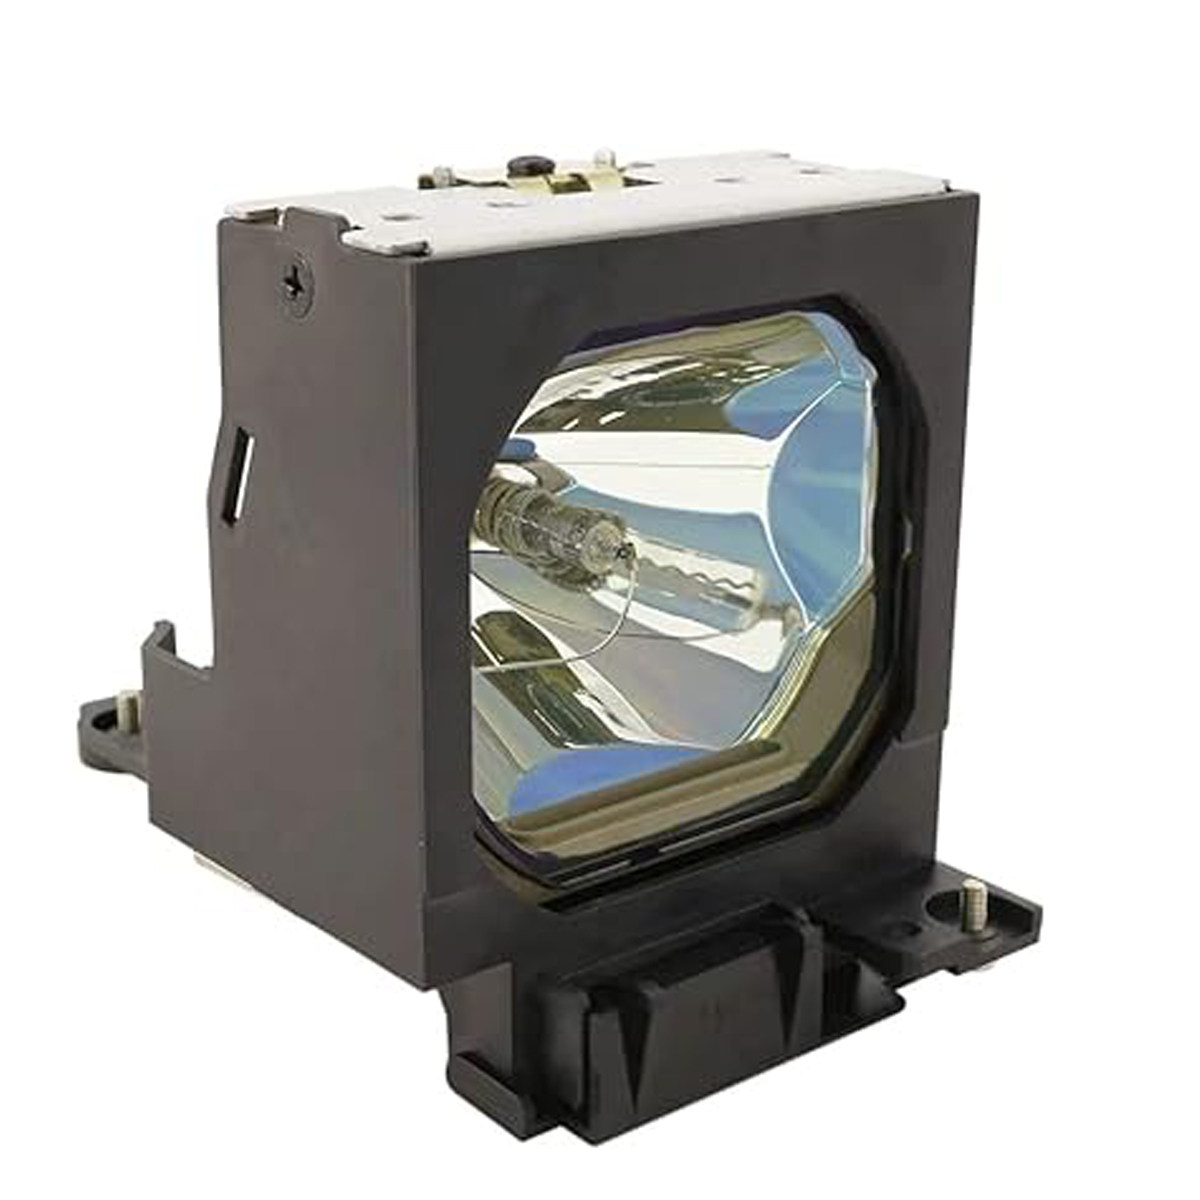 Replacement Projector lamp LMP-P201 For Sony VPL PX21 VPL PX31 VPL PX32